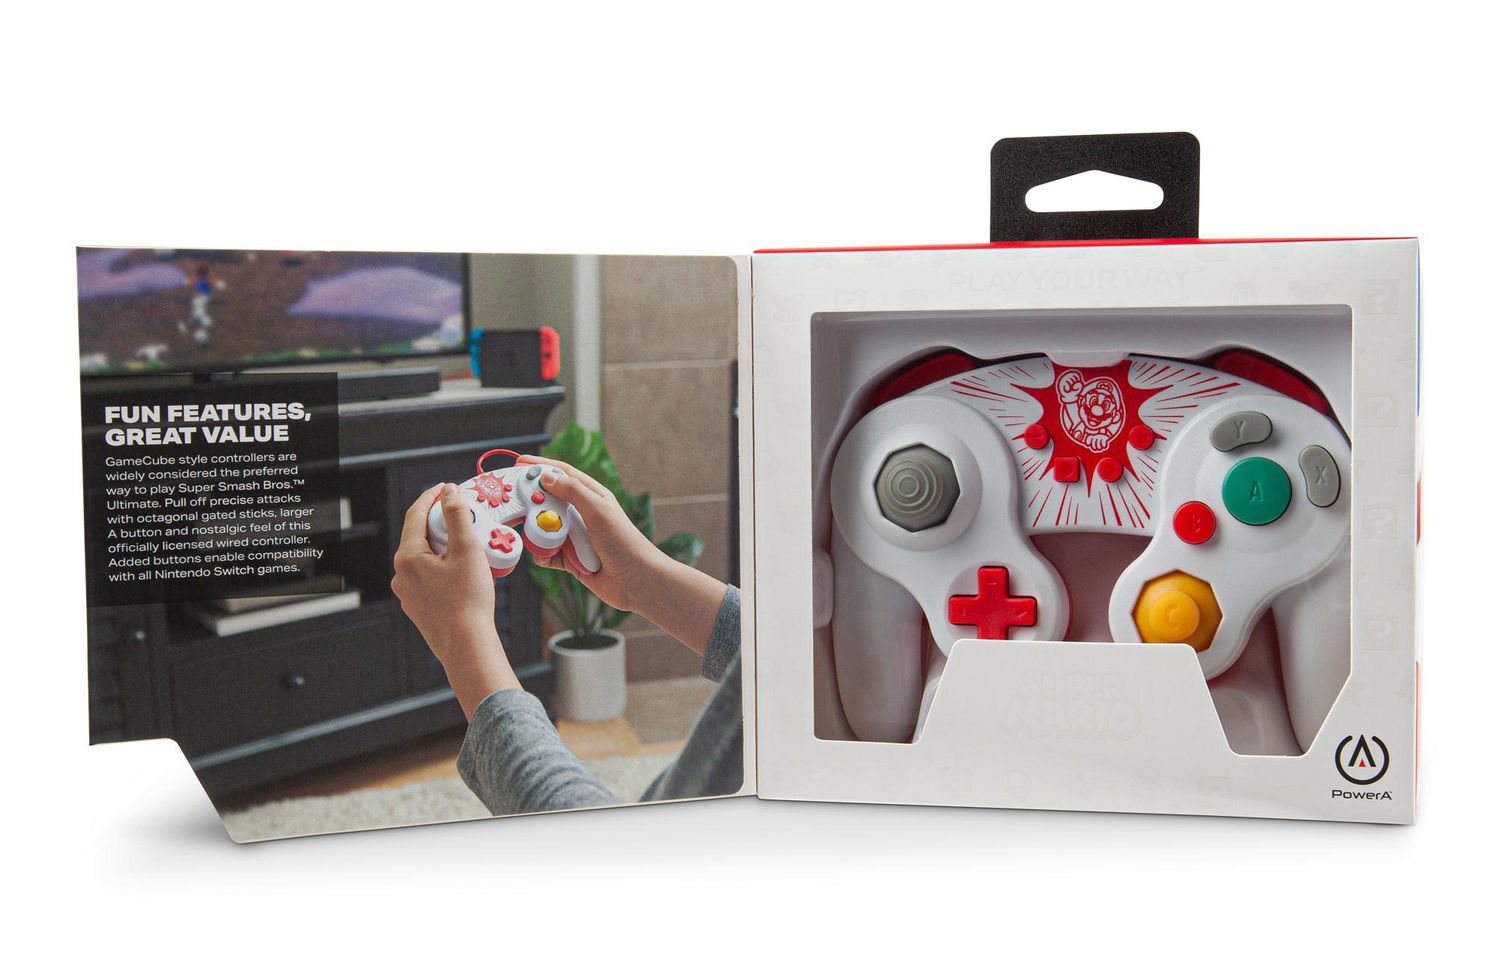 PowerA Wired Controller for Nintendo Switch – GameCube style Mario